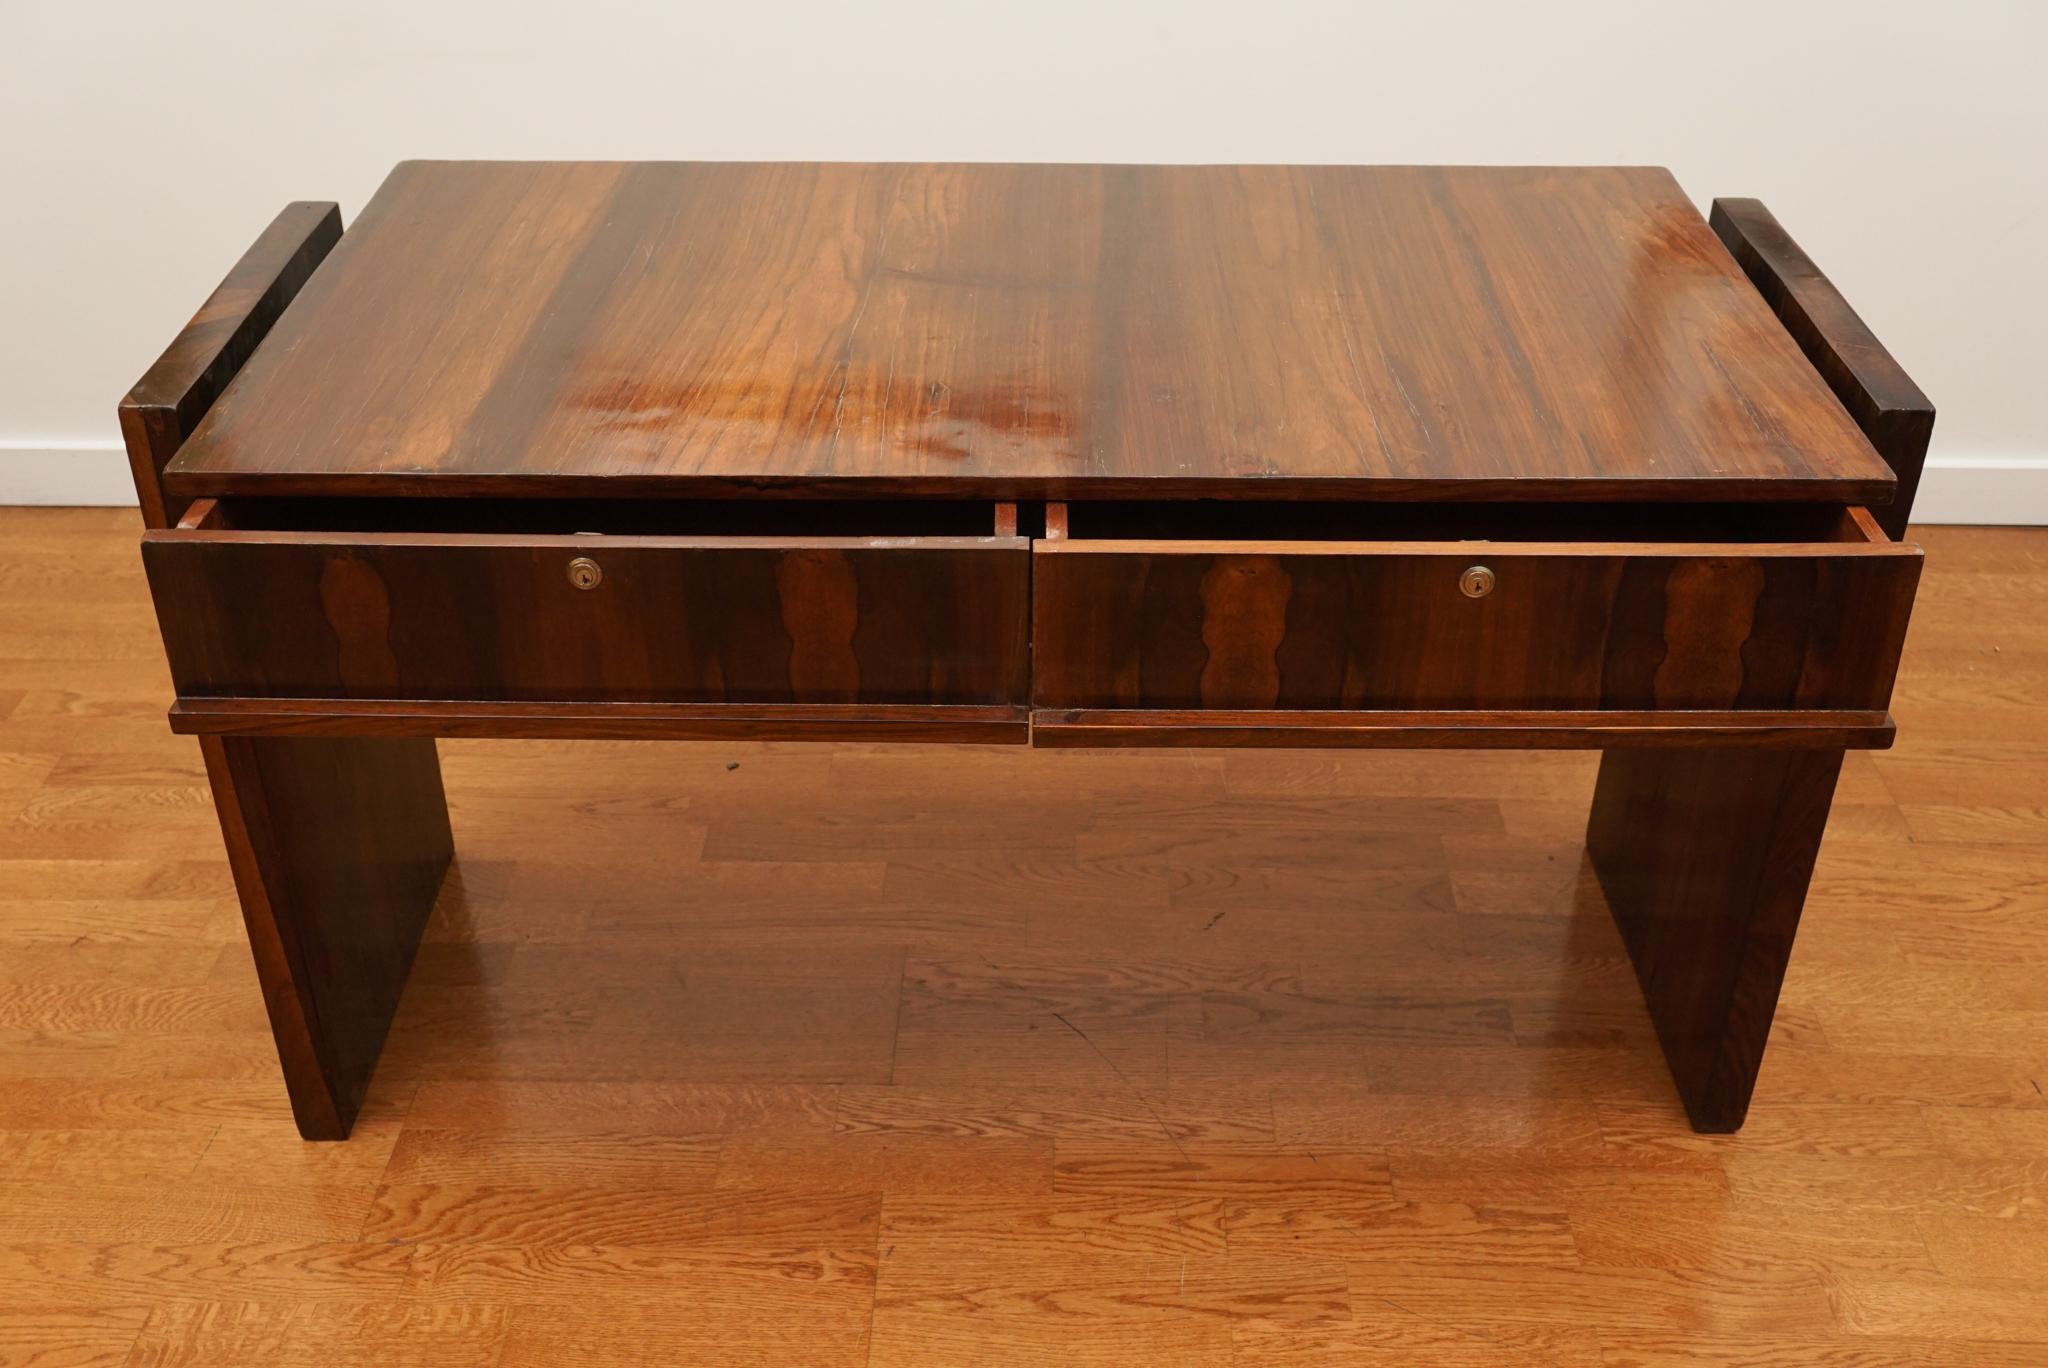 Joaquim Tenreiro (1906–1992) was among the leading furniture designers and visual artists in mid-20th century Brazil.  The Tenreiro-designed desk, shown here, is made in solid wood and Brazilian rosewood veneer.  The desk top is floated between